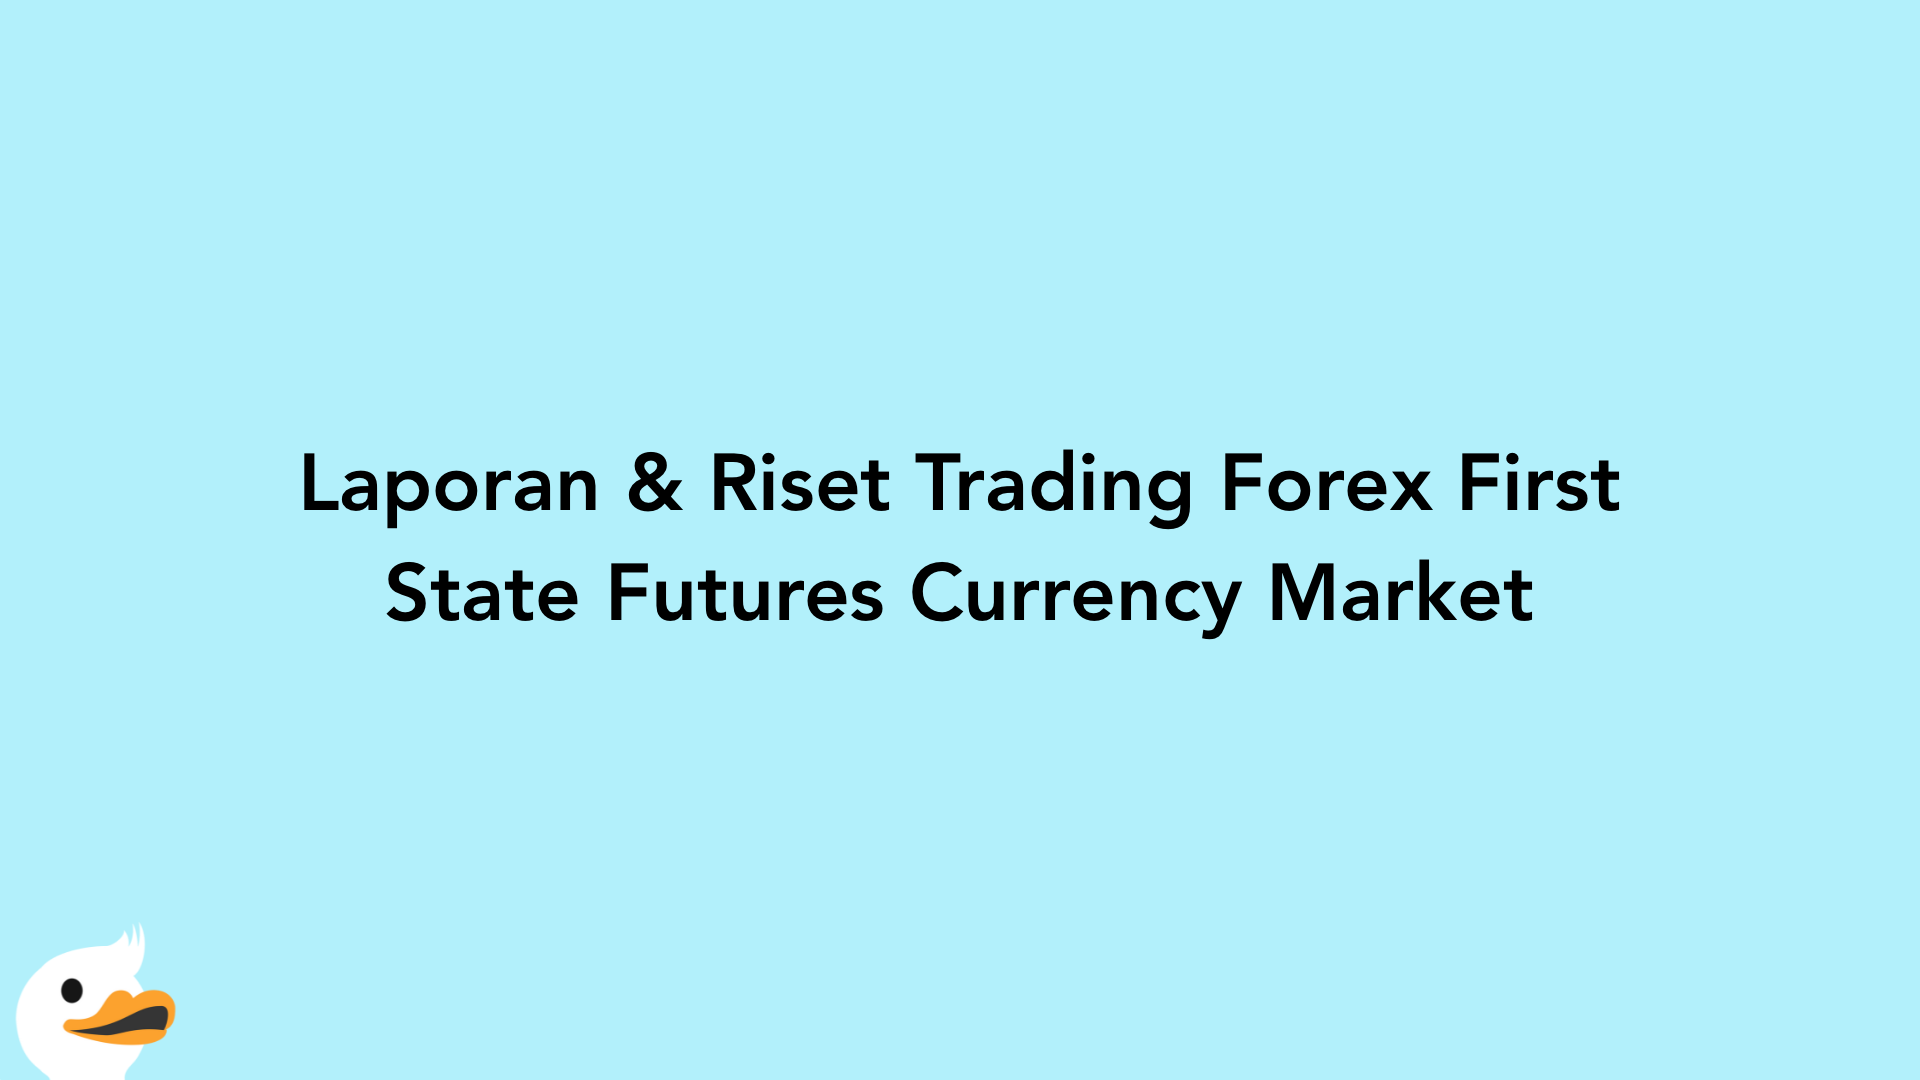 Laporan & Riset Trading Forex First State Futures Currency Market